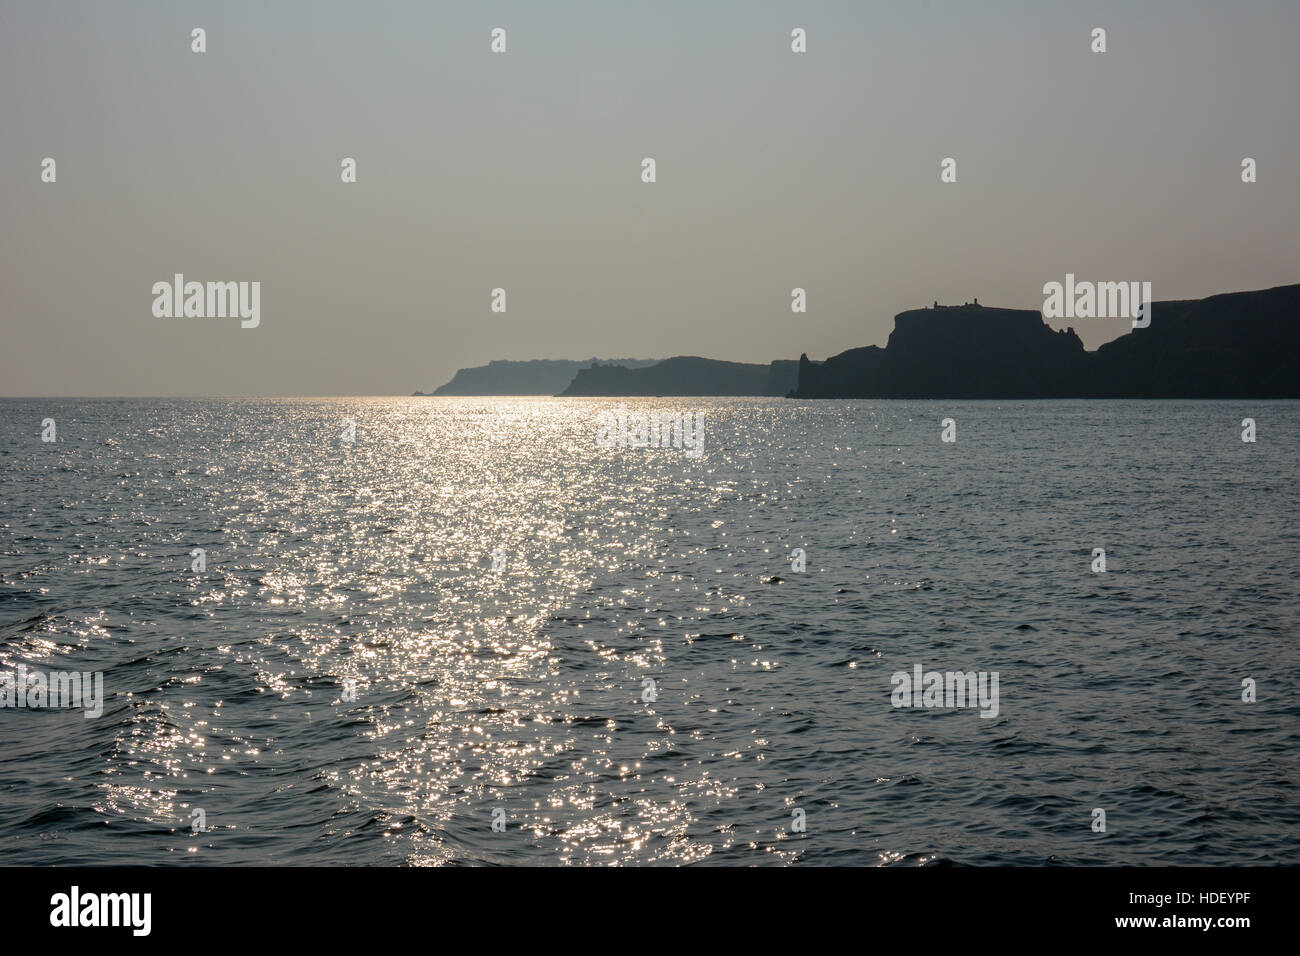 Three headlands in mist with reflection in a calm sea Stock Photo